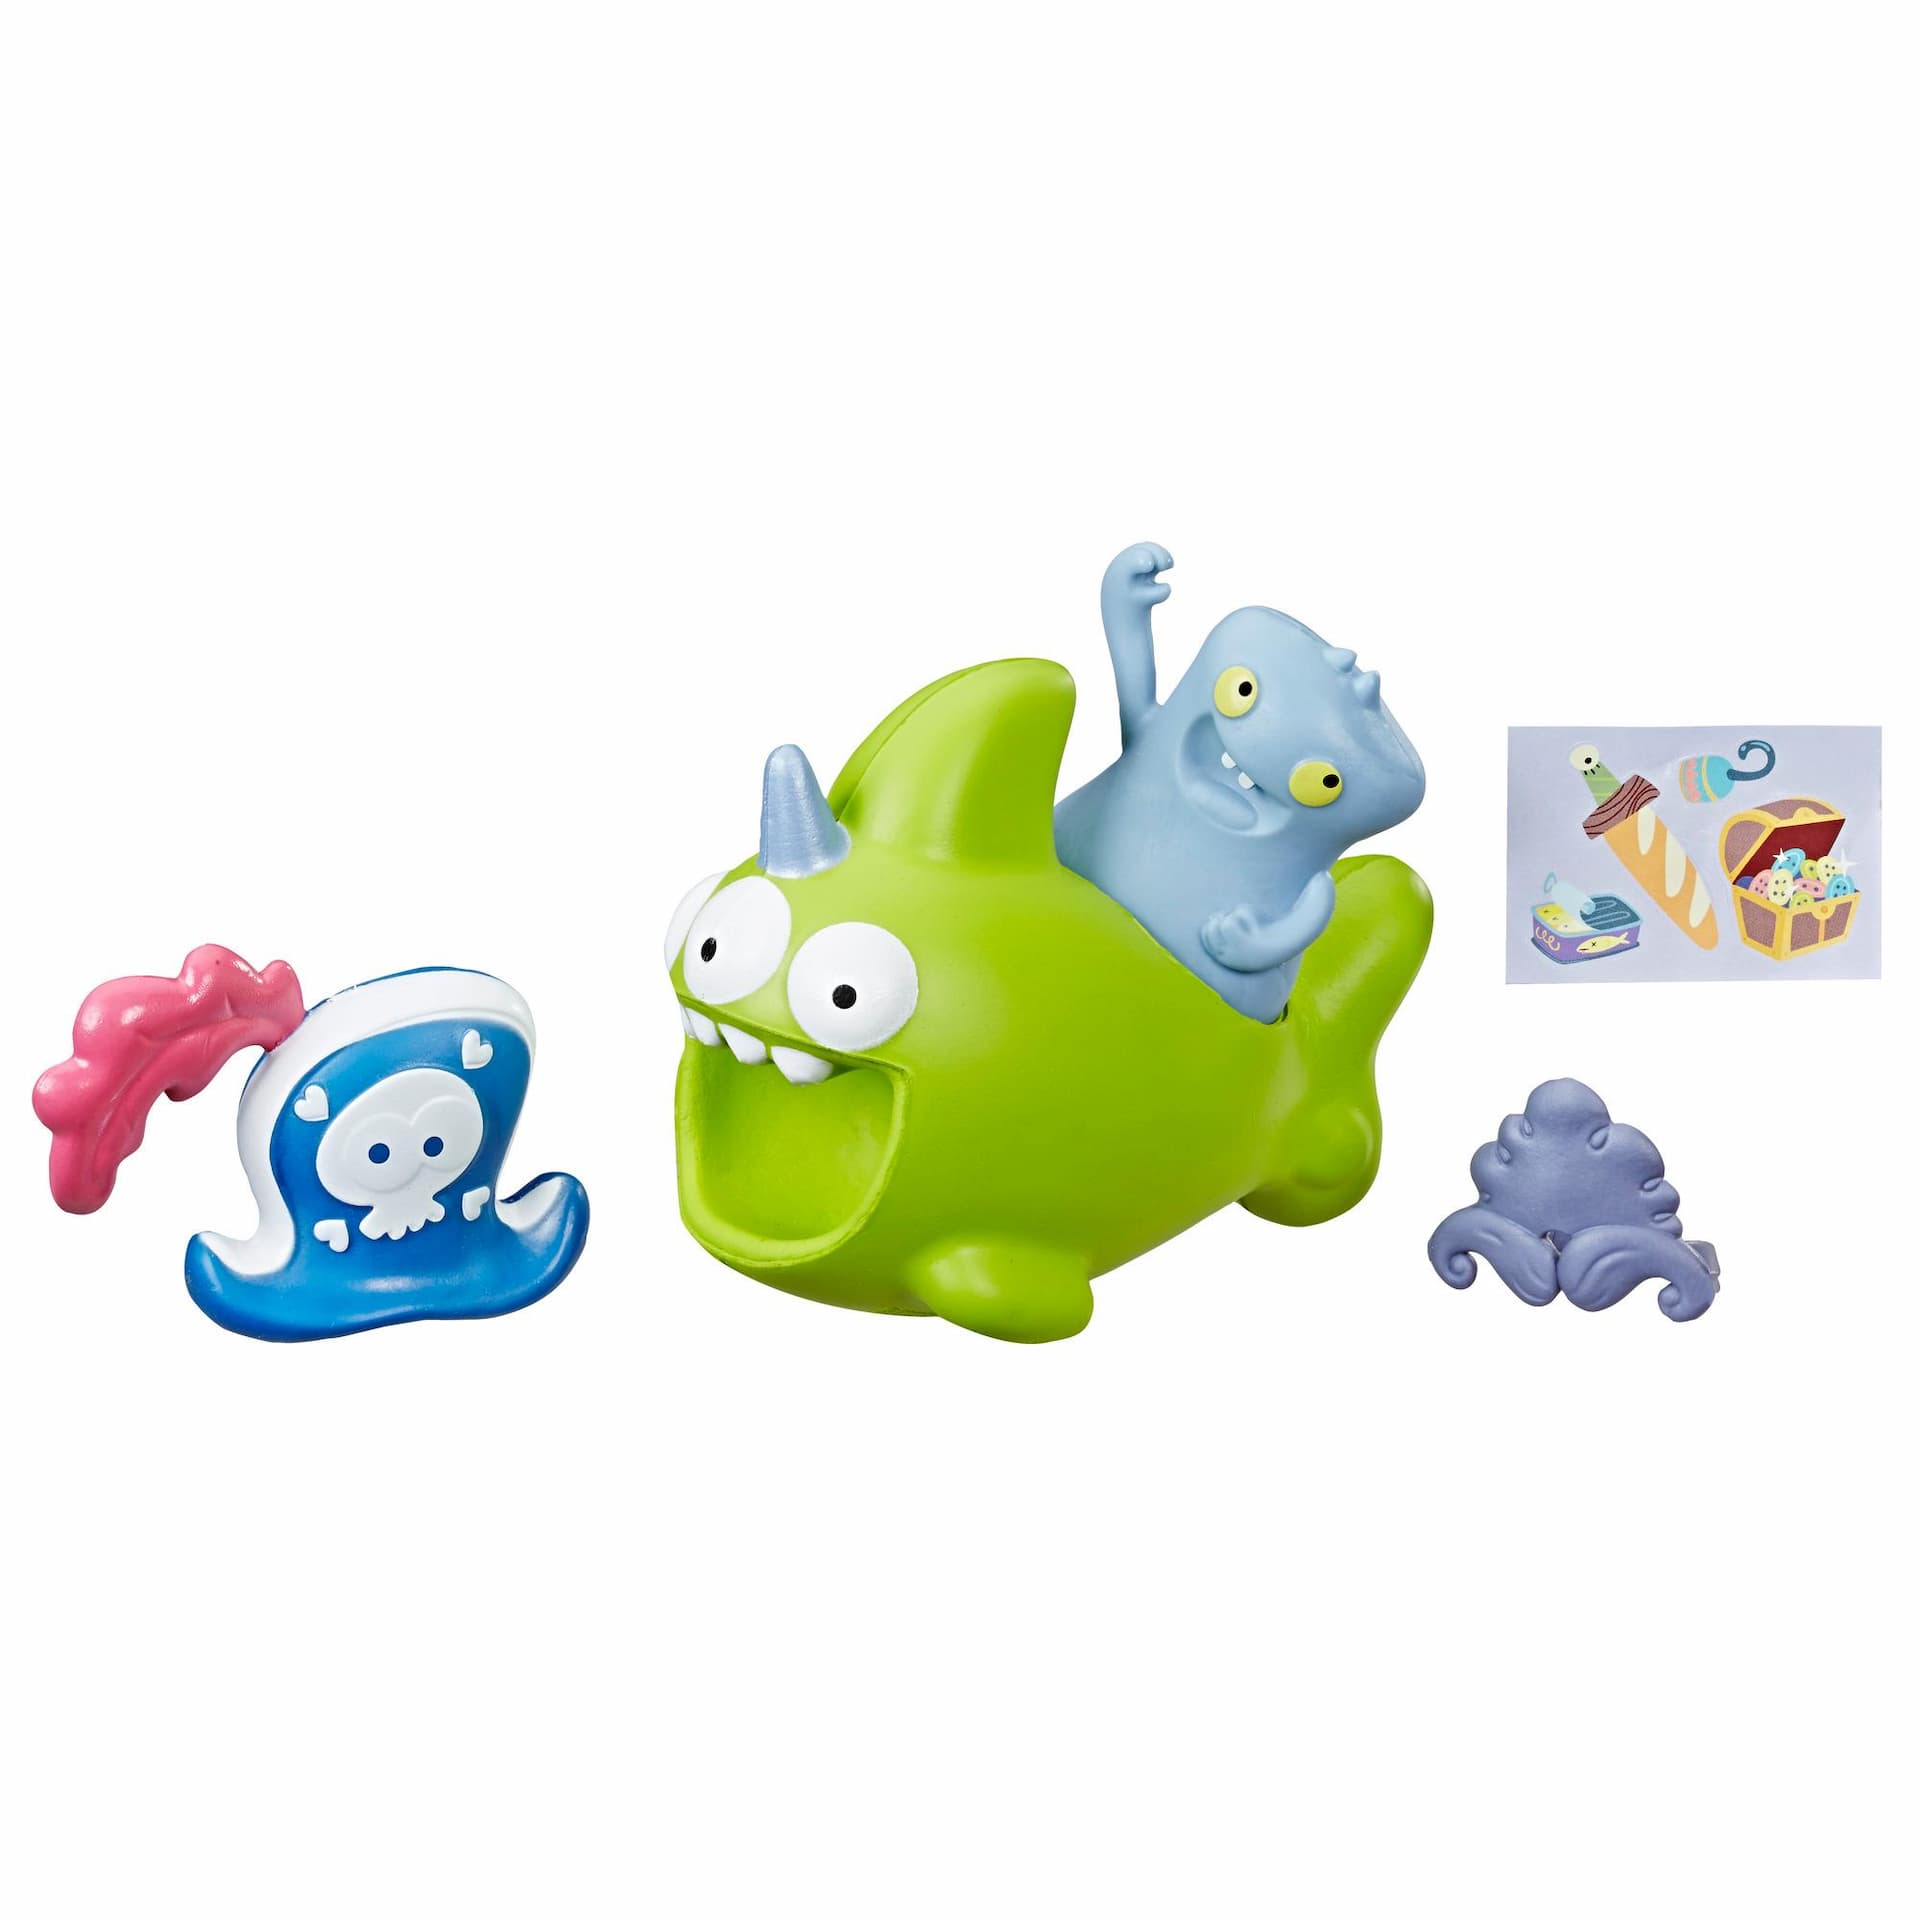 UglyDolls Babo and Squish-and-Go Sharwhal, 2 Toy Figures with Accessories